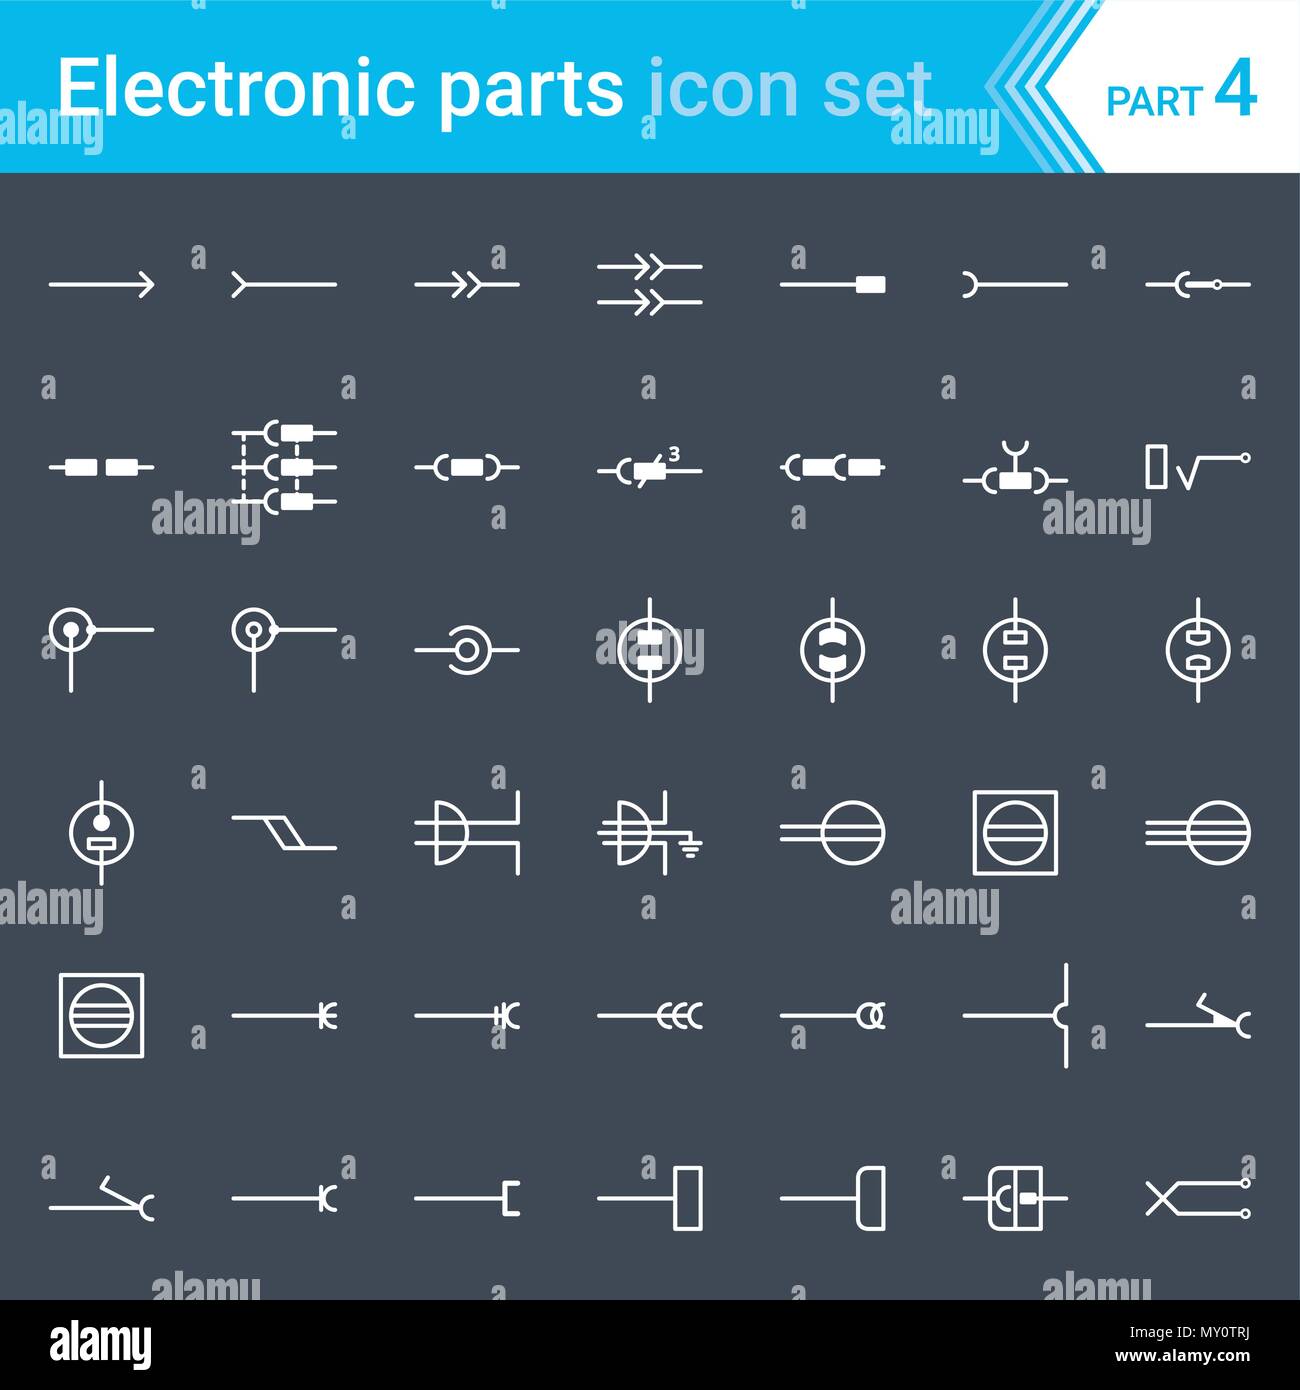 Electric and electronic icons, electric diagram symbols. Electrical connectors, sockets, plugs and jack. Stock Vector